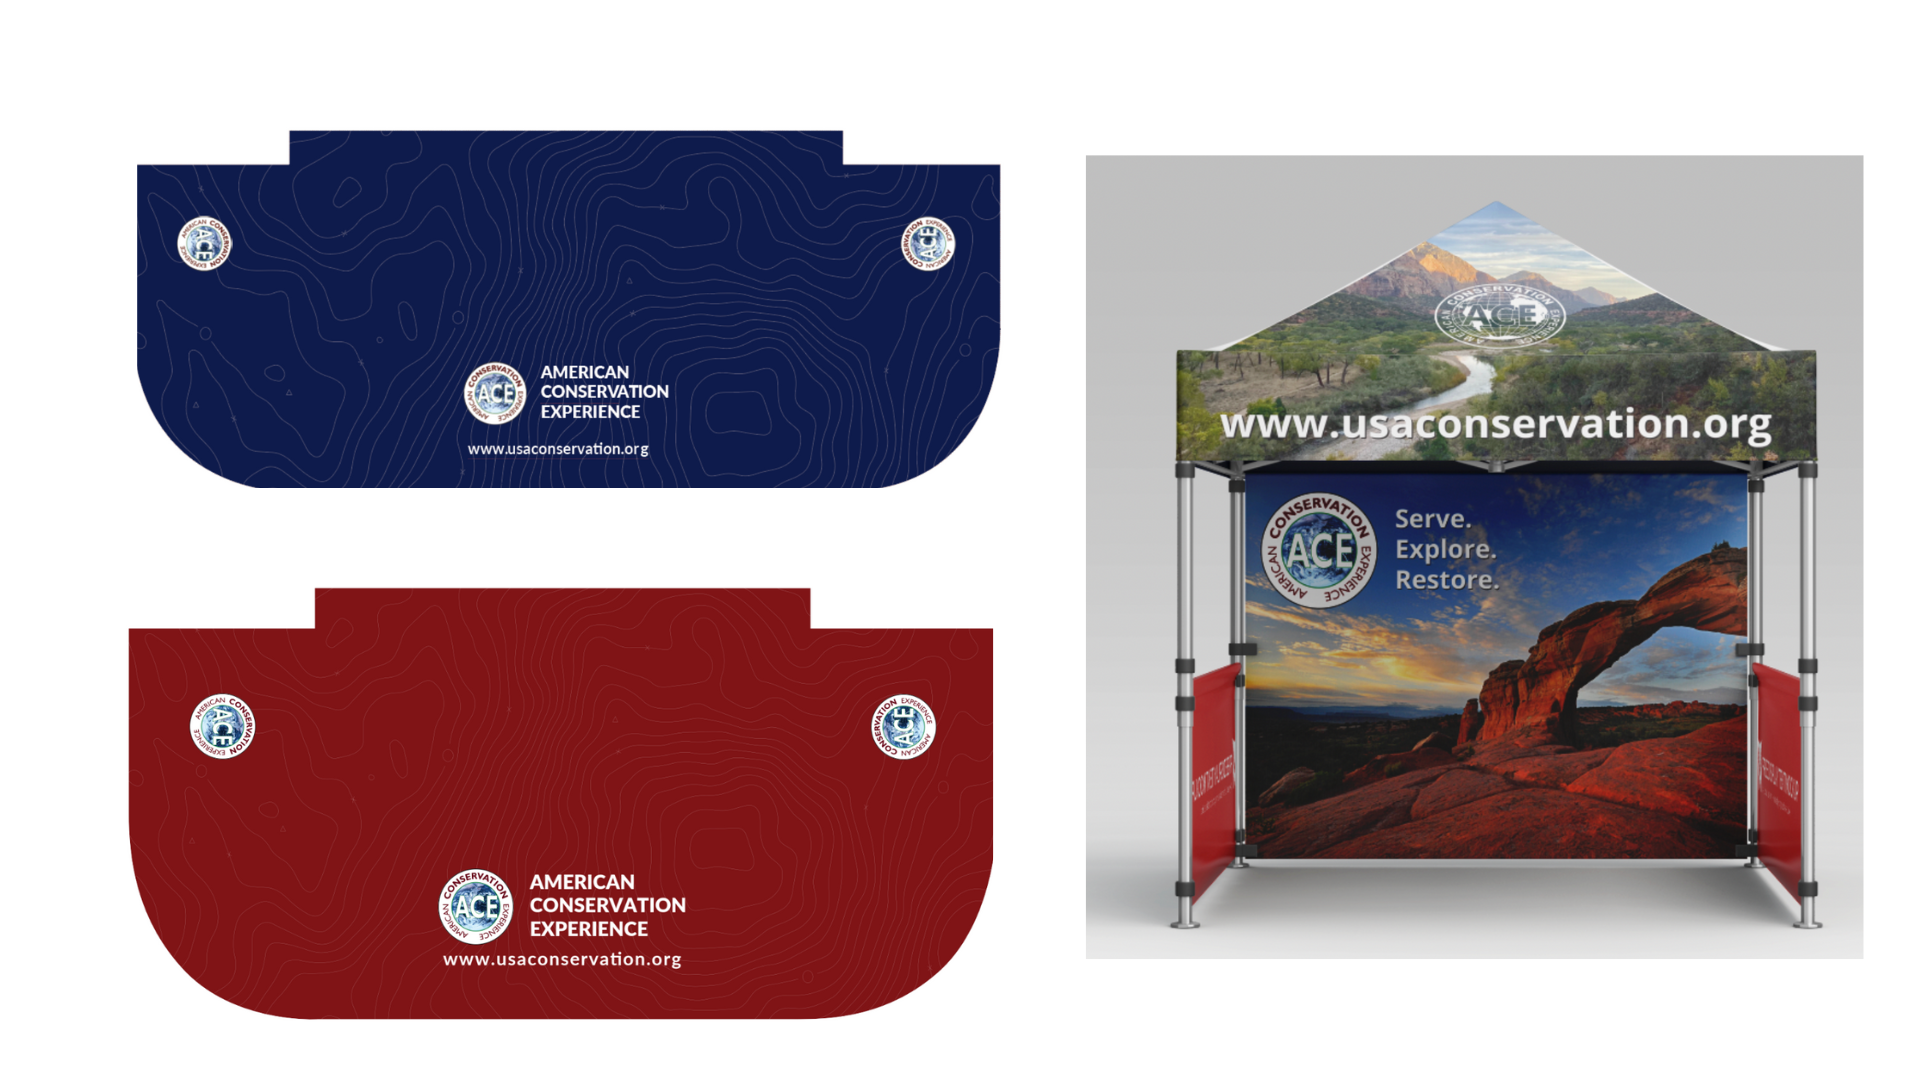 On the left, a red table cover with topographic lines, representing ACE's brand identity. On the right, a blue table cover with similar topographic lines. Next to them, a pop-up tent displays a captivating red rock landscape with a flowing river, highlighting ACE's commitment to environmental conservation and outdoor experiences.